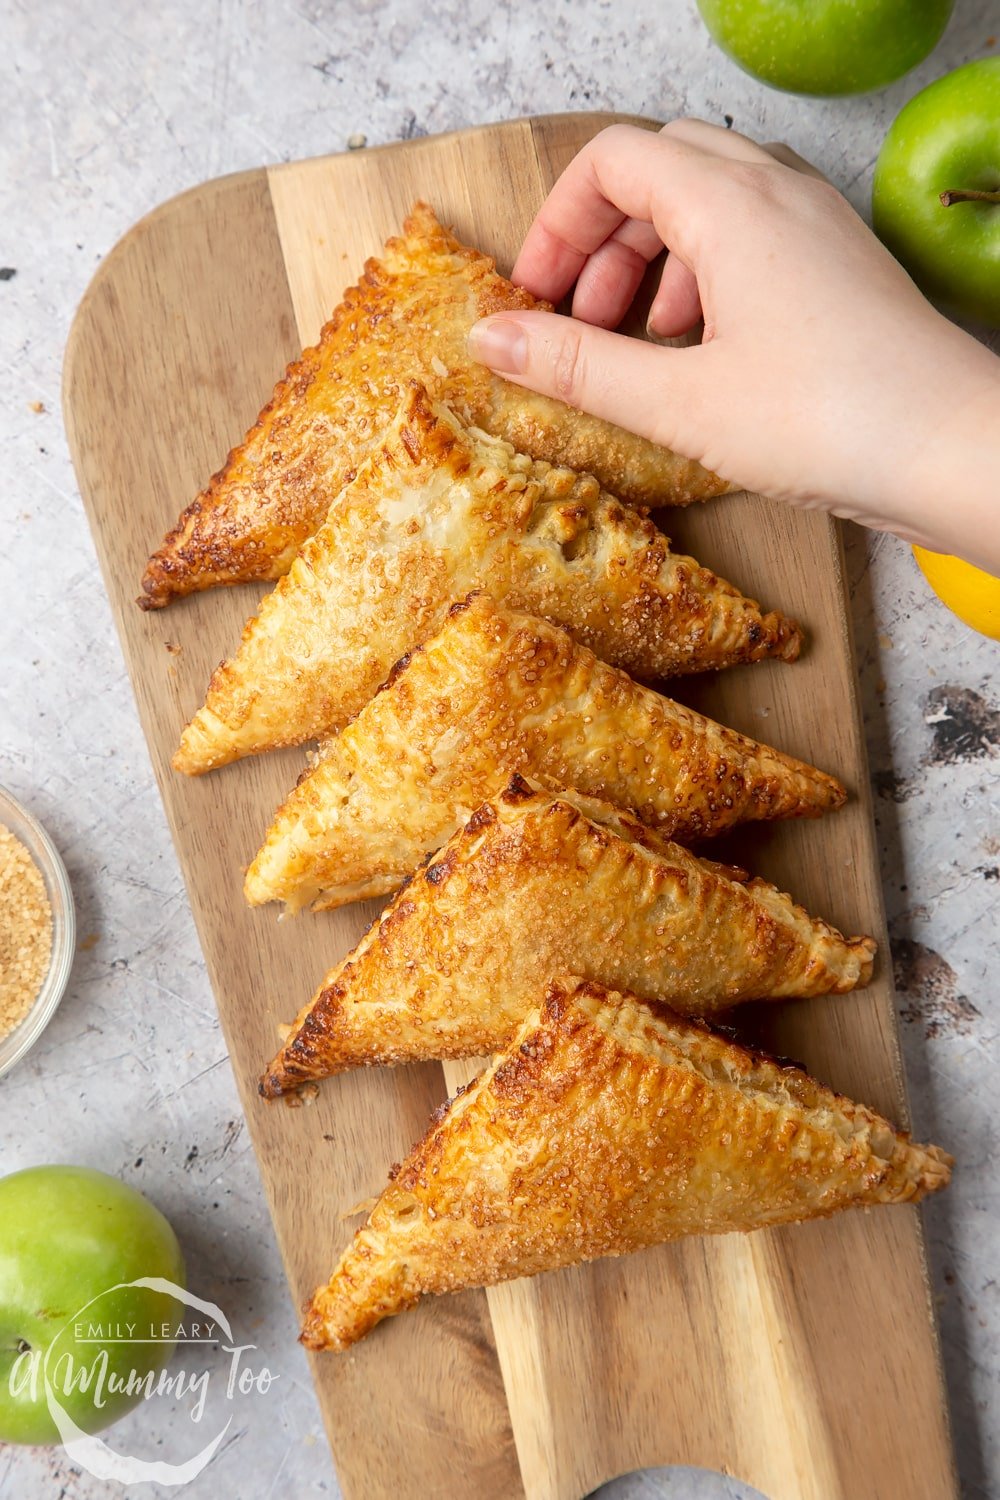 Five cinnamon apple turnovers lined up on a wooden chopping board with a hand holding one.